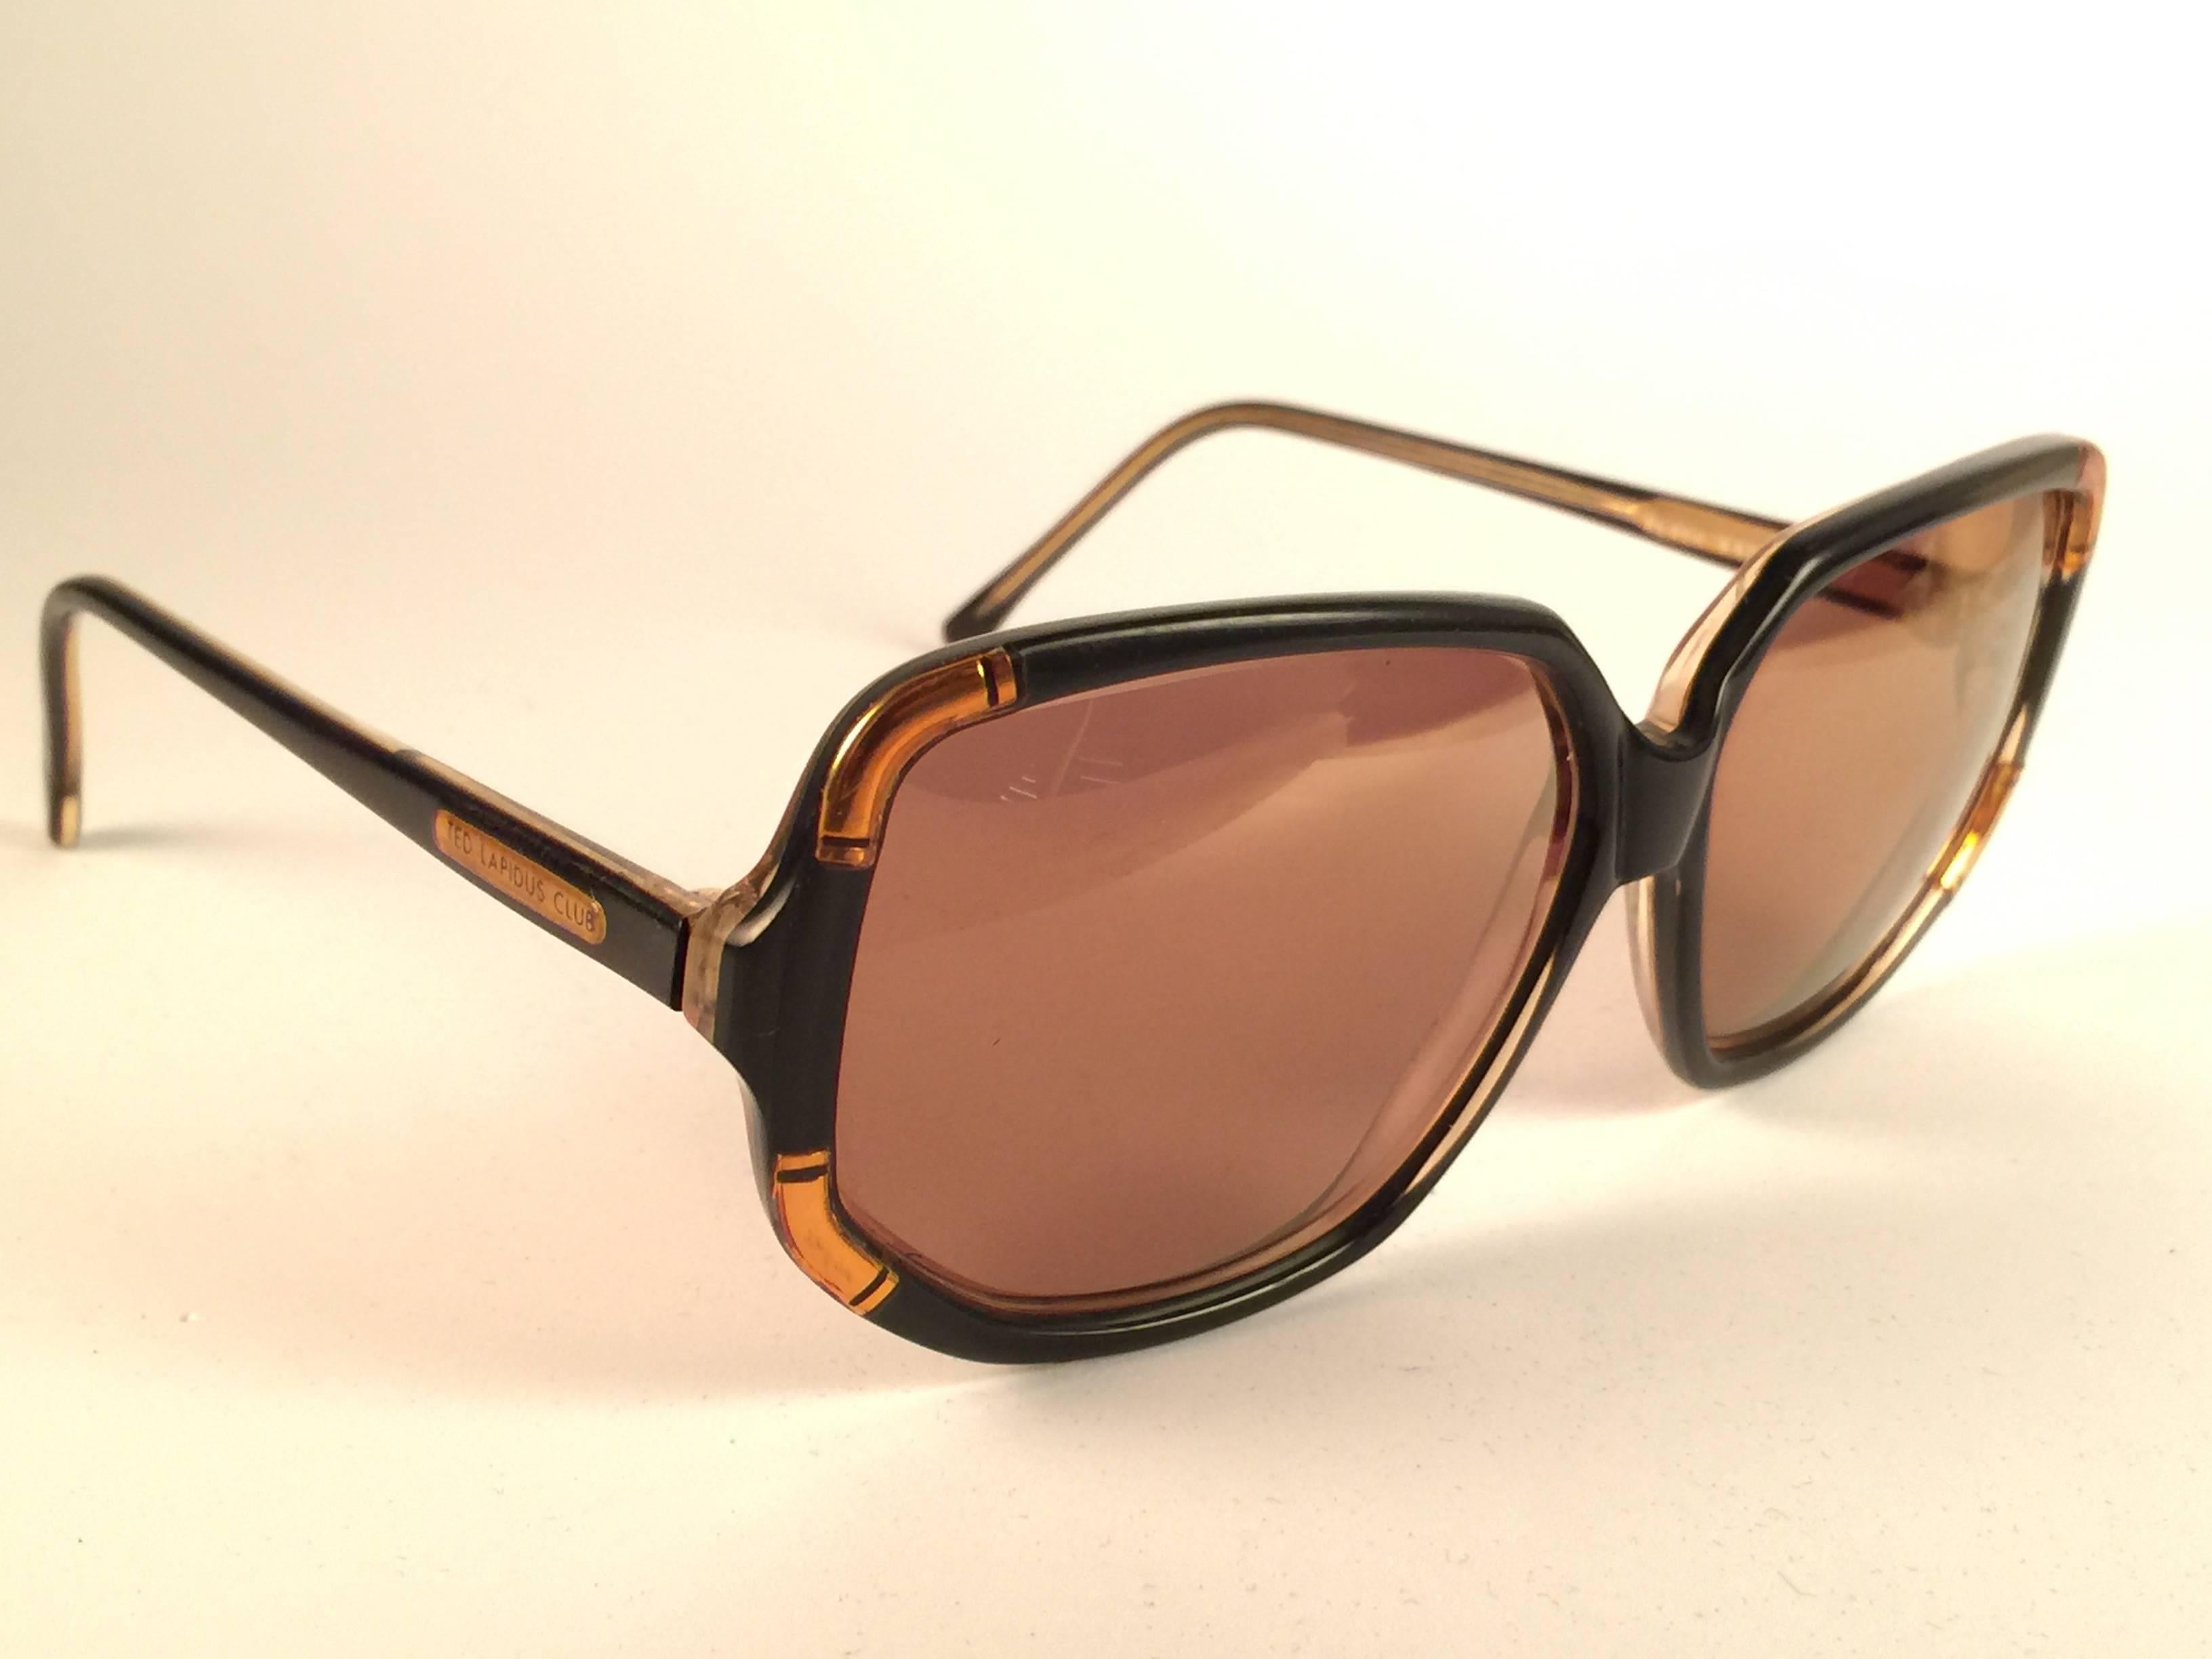 New Vintage Ted Lapidus Black & gold frame with spotless gold mirror lenses. Please consider that this item its nearly 50 years old and could show minor sign of wear or discolouration due to storage. Made in Paris. Produced and design in 1970's.